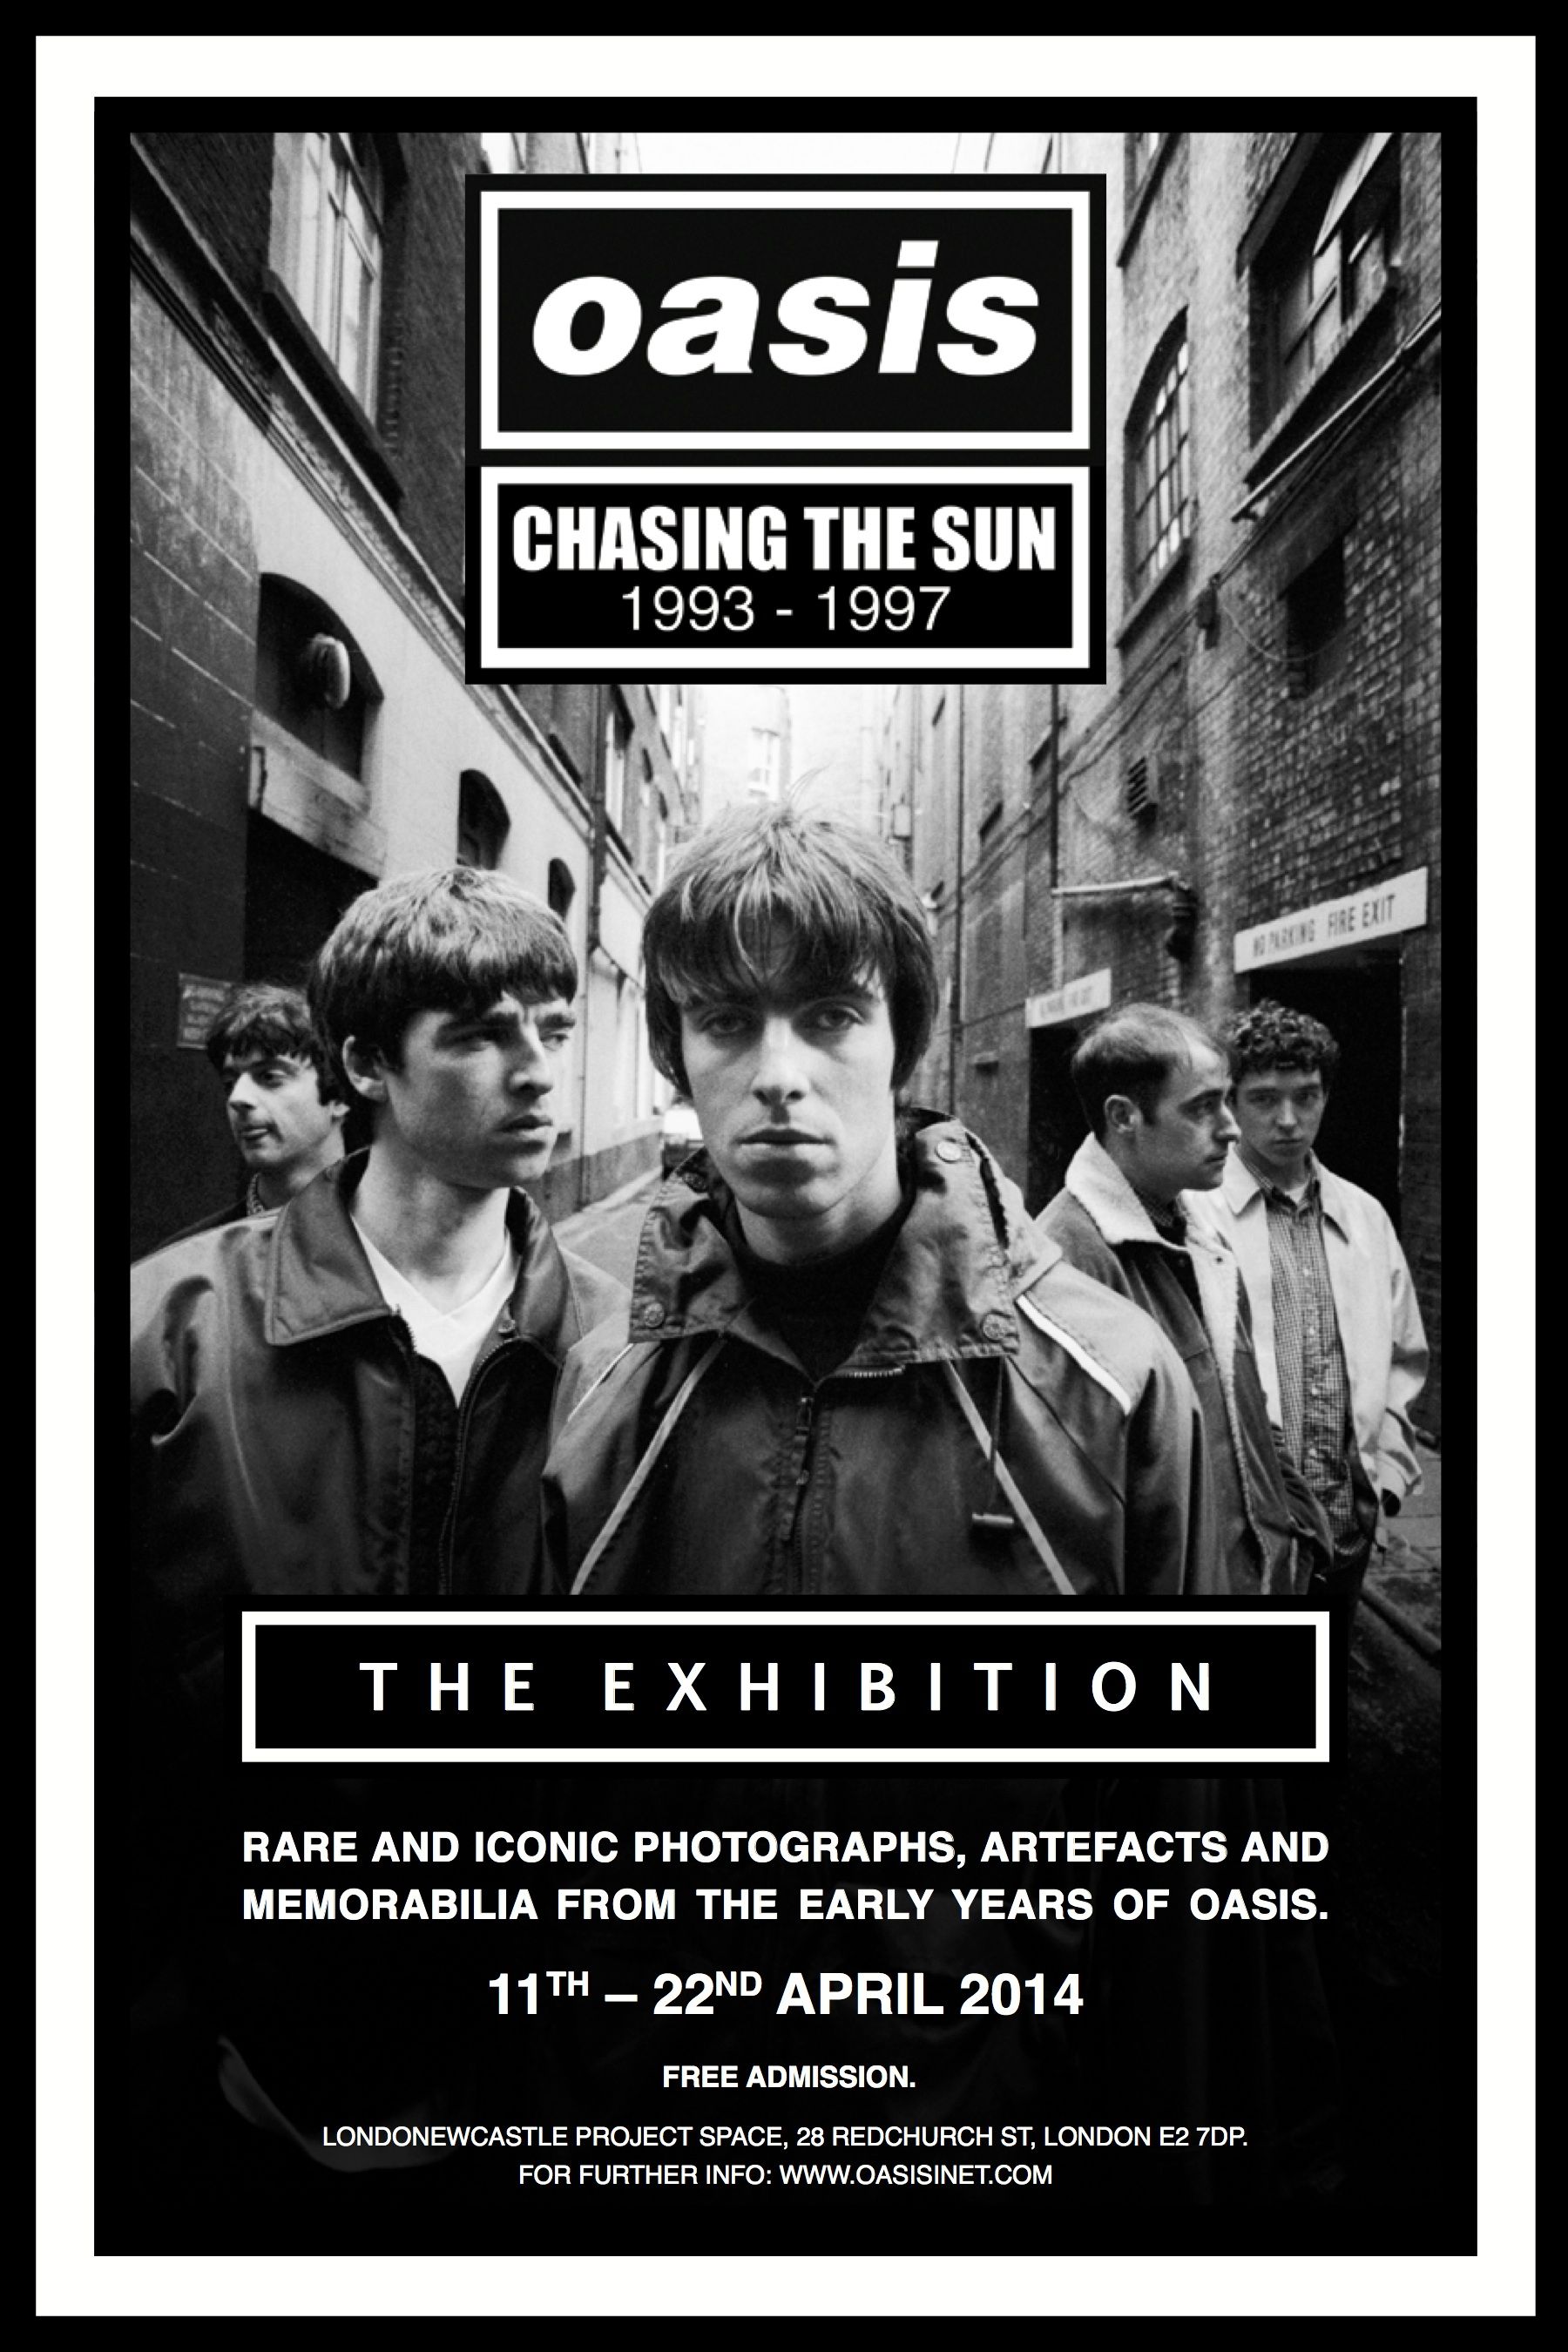 Oasis - Chasing the Sun The Exhibition | Oasis | Pinterest | Oasis